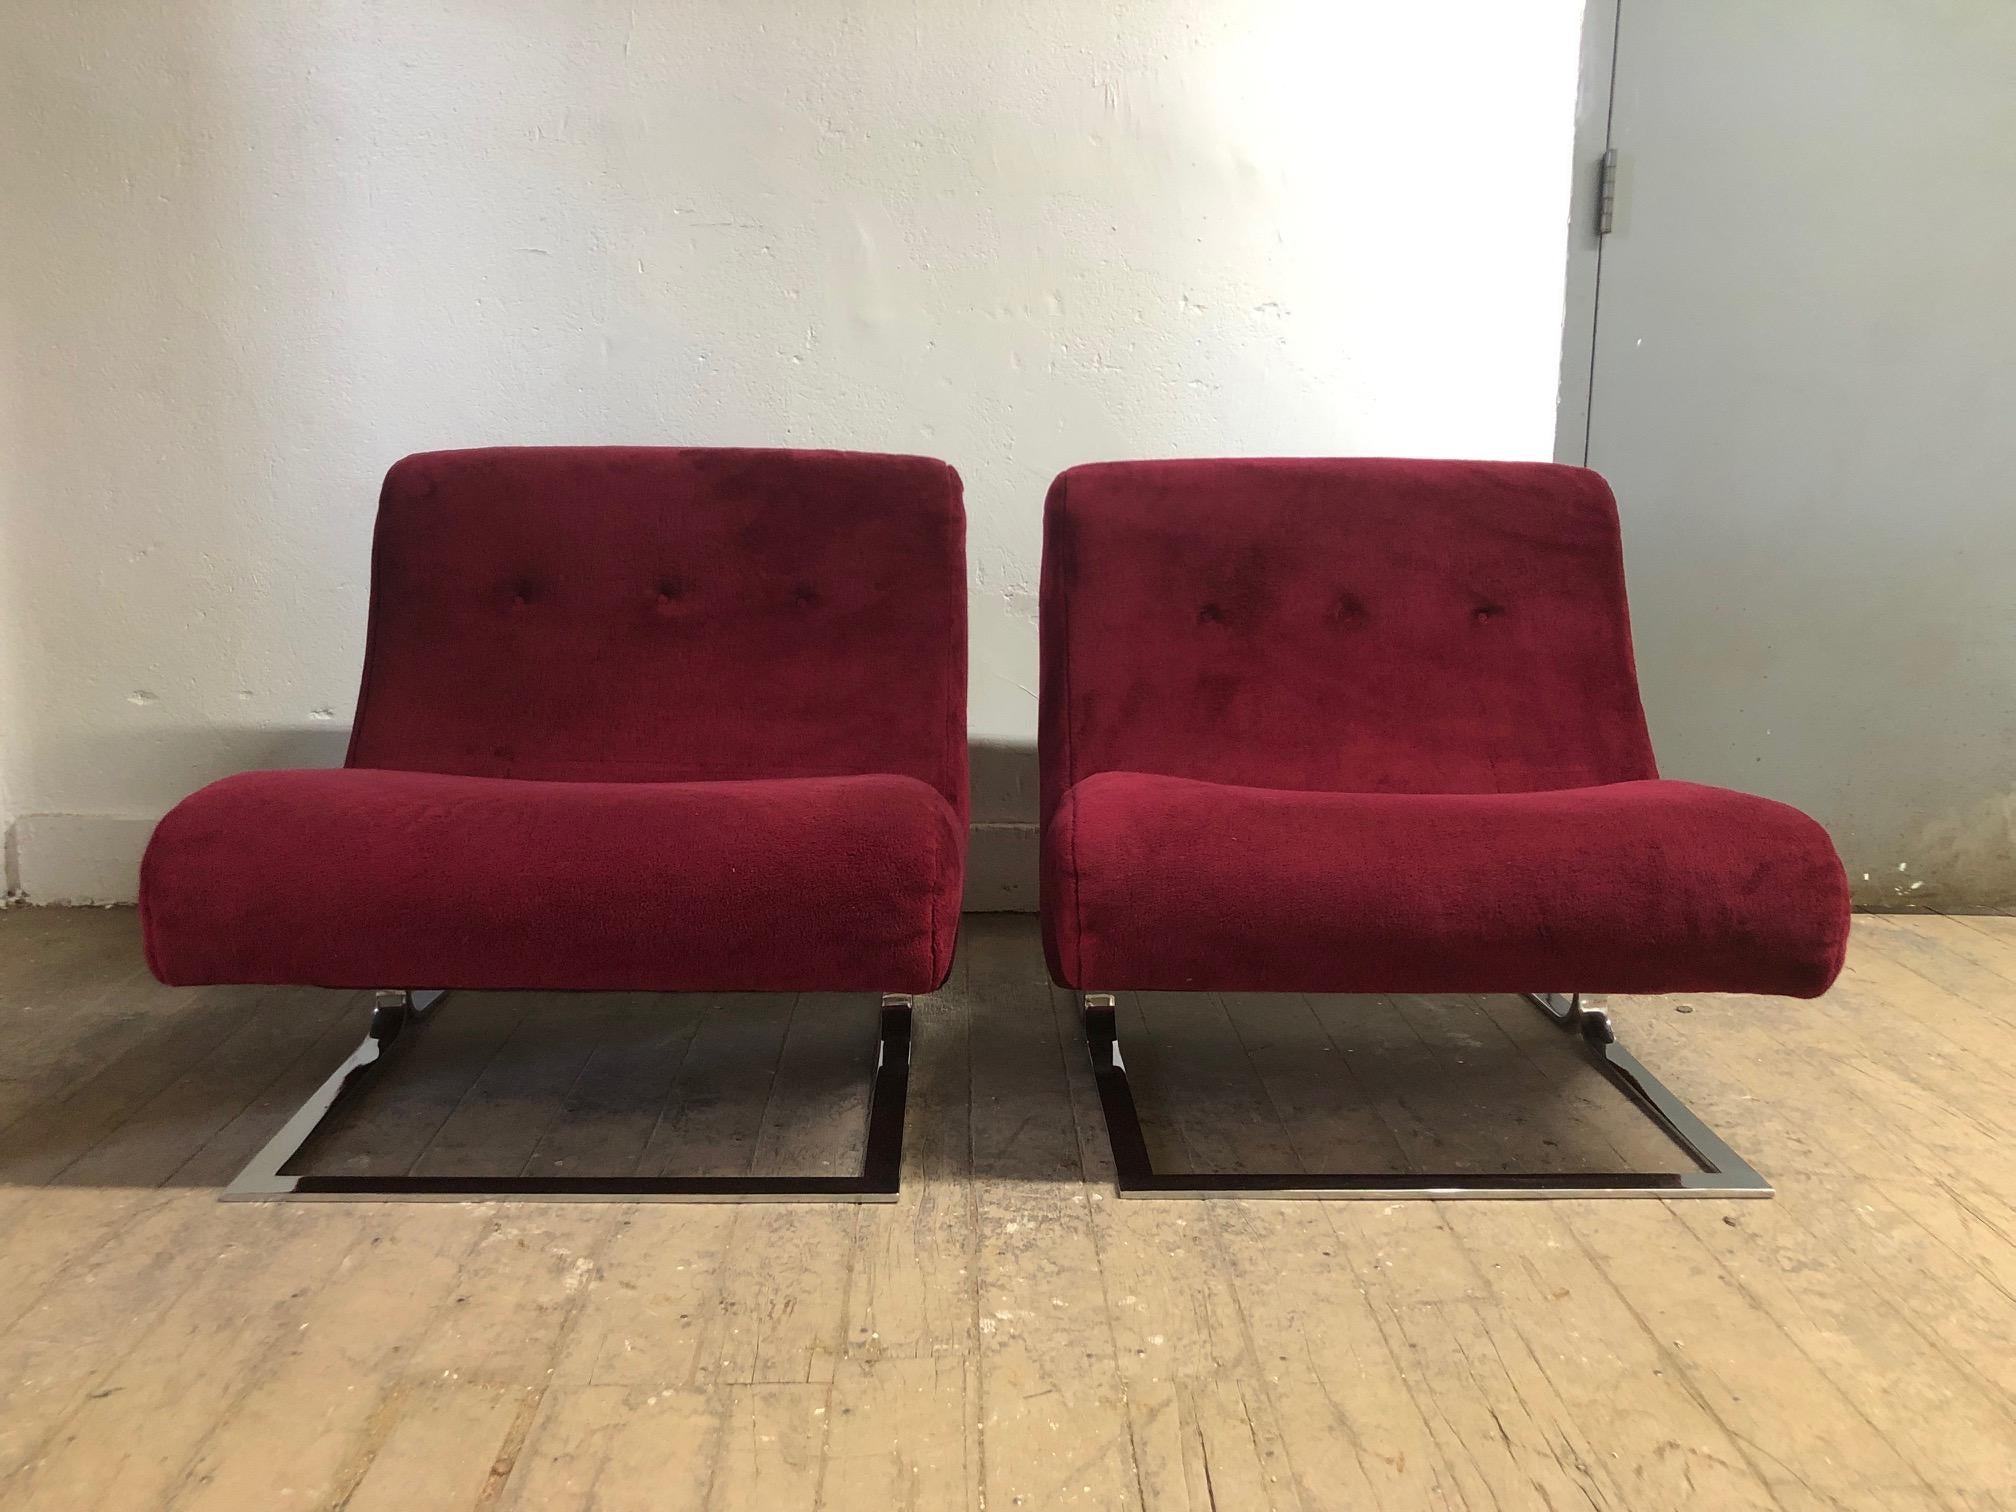 Pair of chrome lounge chairs style of Milo Baughman.